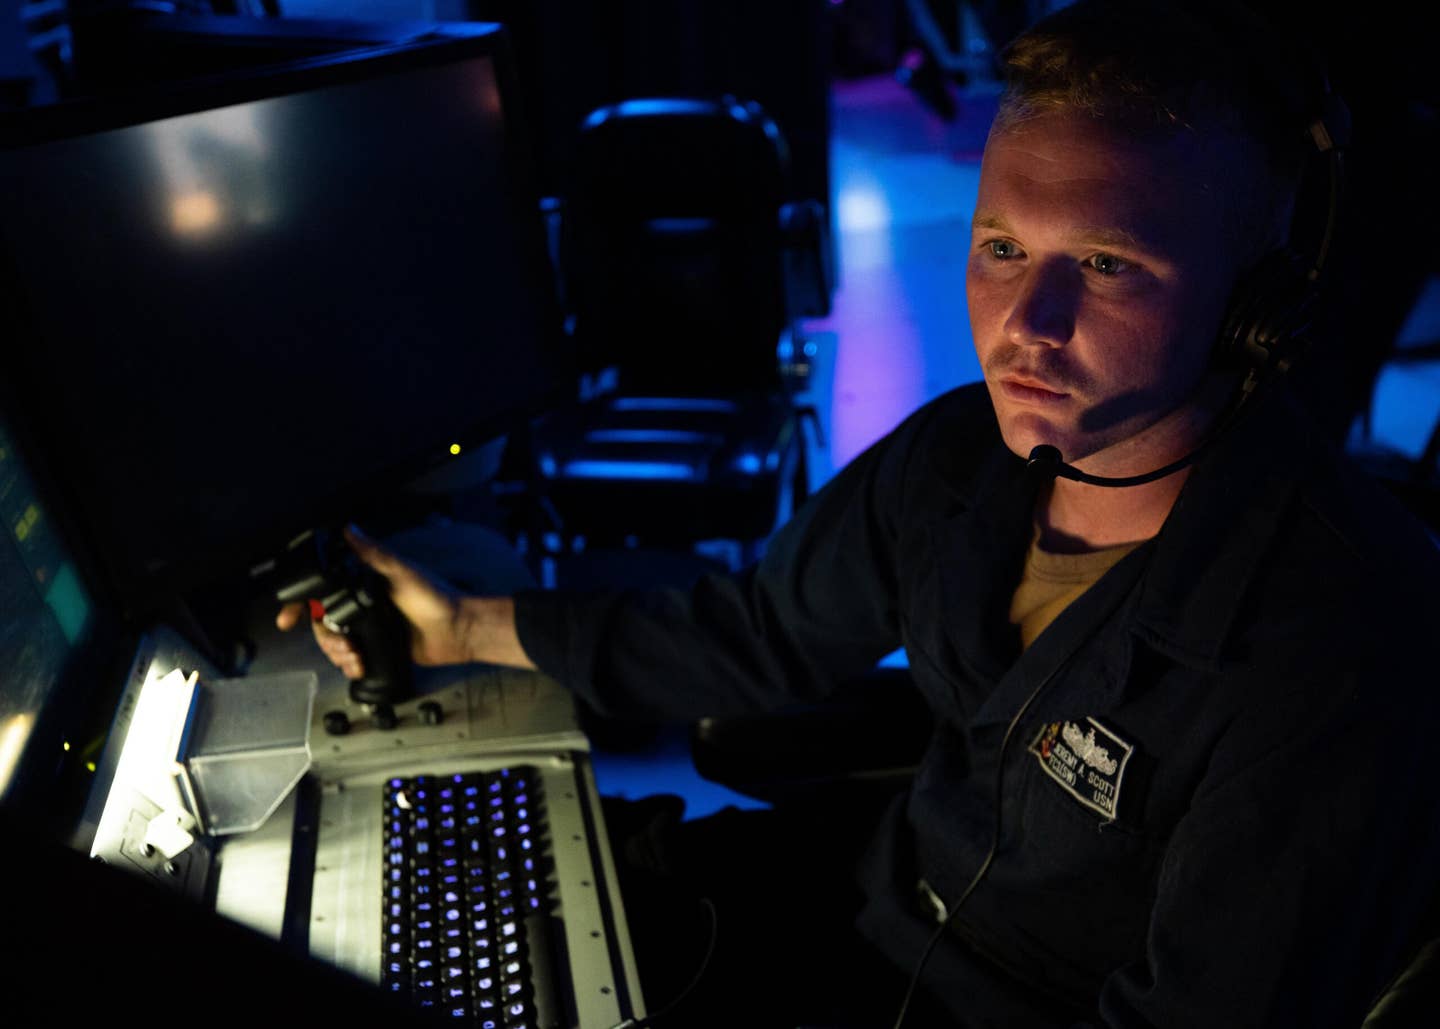 A fire controlman stands watch aboard the USS <em>Chancellorsville</em> (CG-62) in the Philippine Sea, on October 3, 2022. <em>U.S. Navy photo by Petty Officer 2nd Class Justin Stack</em>